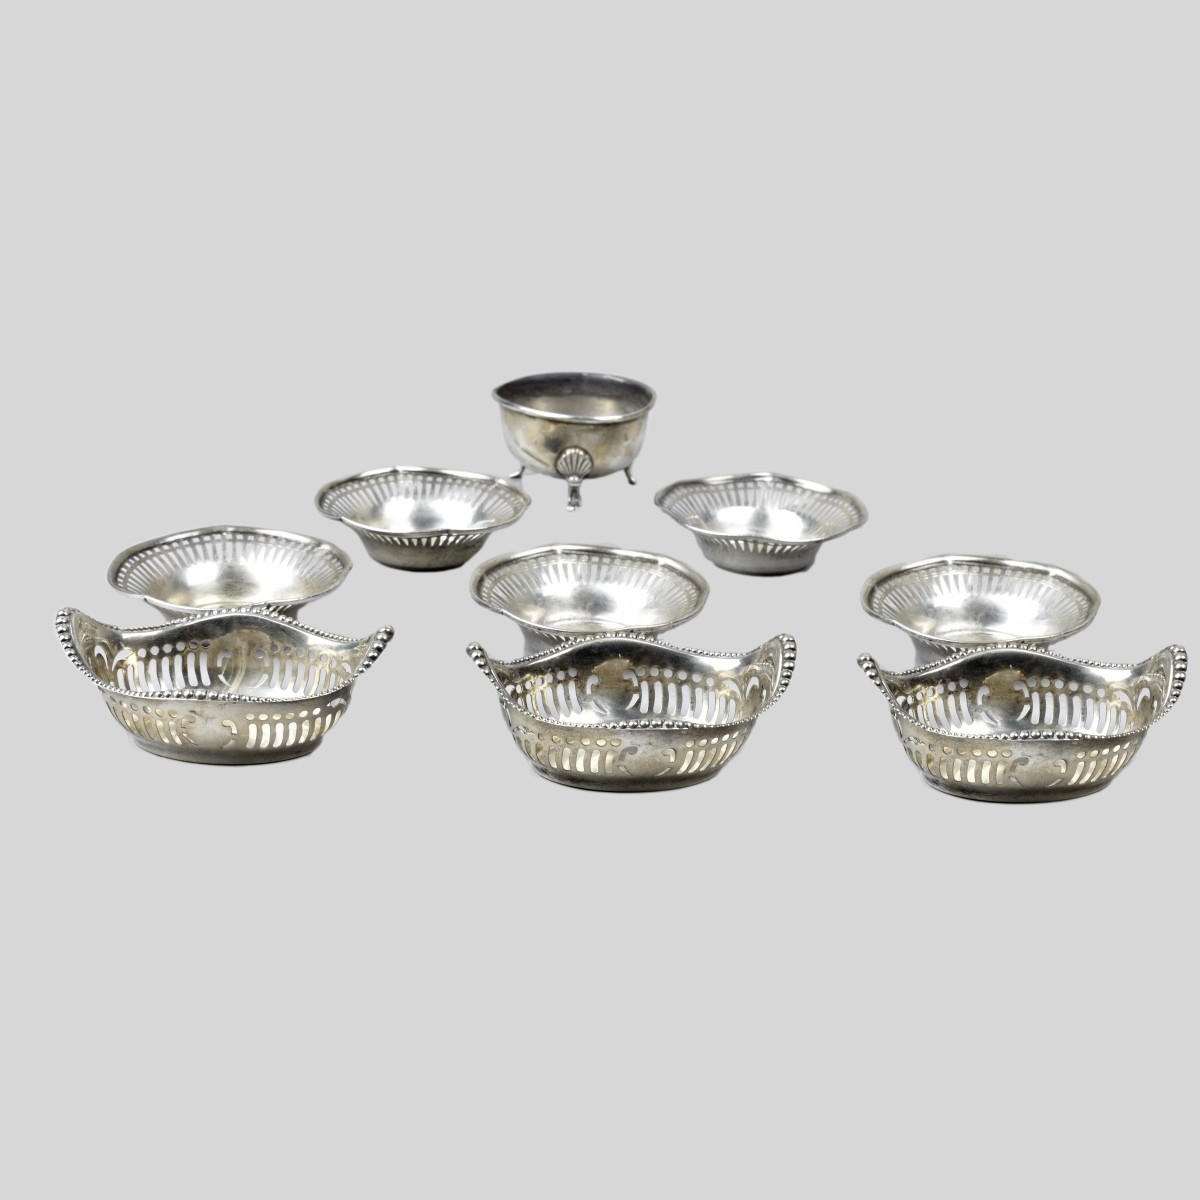 Antique Sterling Silver Tableware